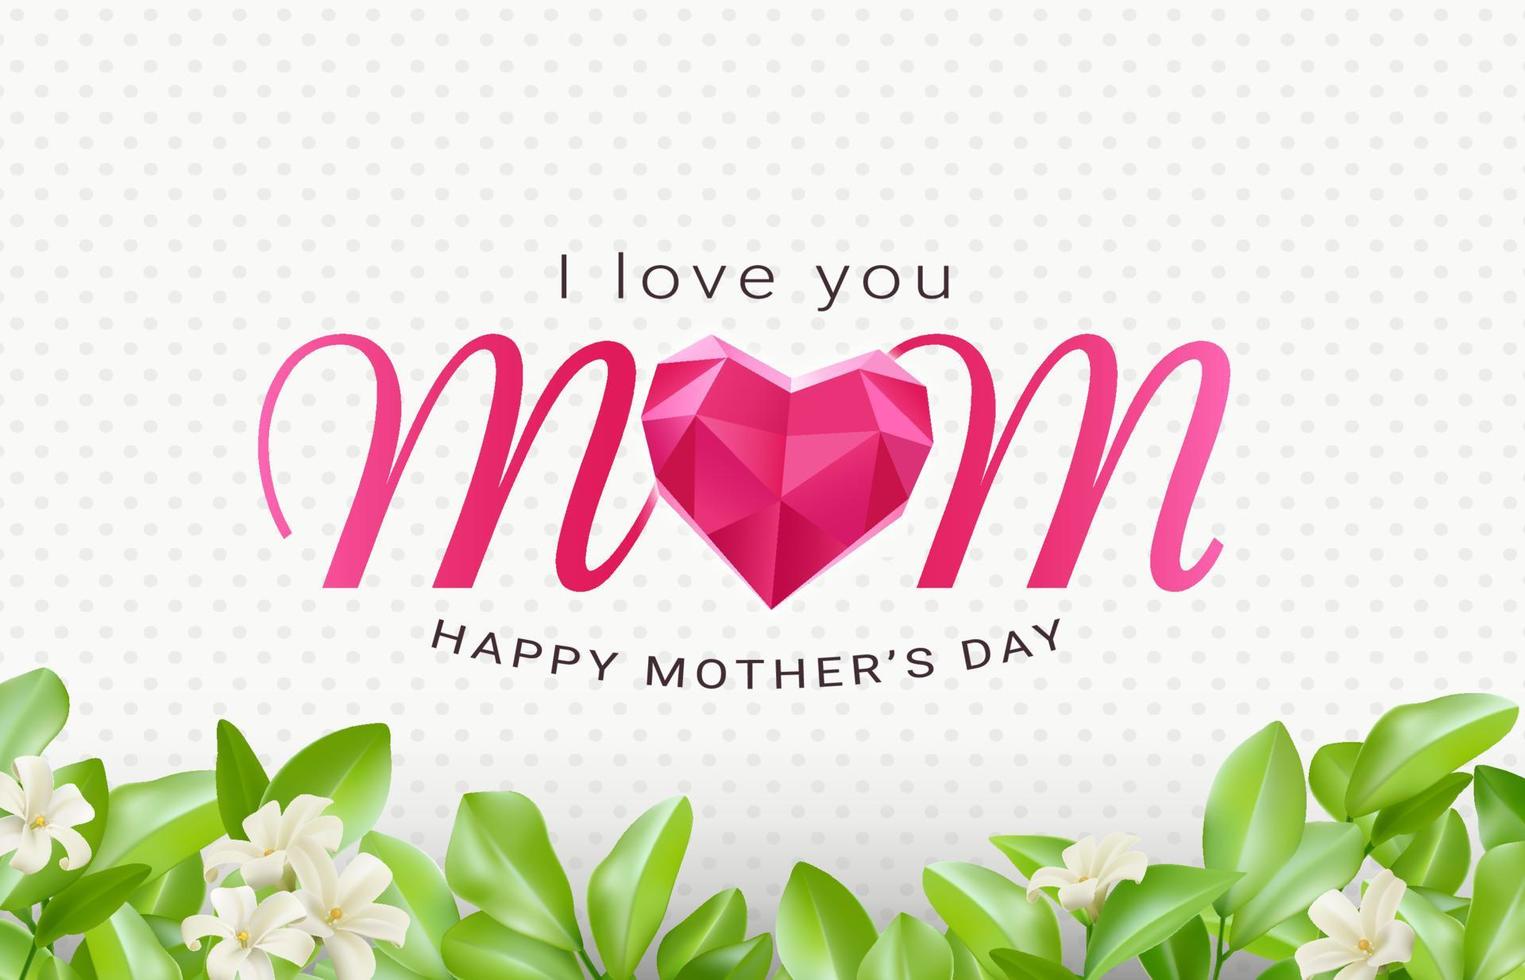 Happy mothers day greeting card with 3d paper hearts design and Mom font with white leaves and flowers on a white background with polka dots. I love you mom. Template for International Mother's Day. vector